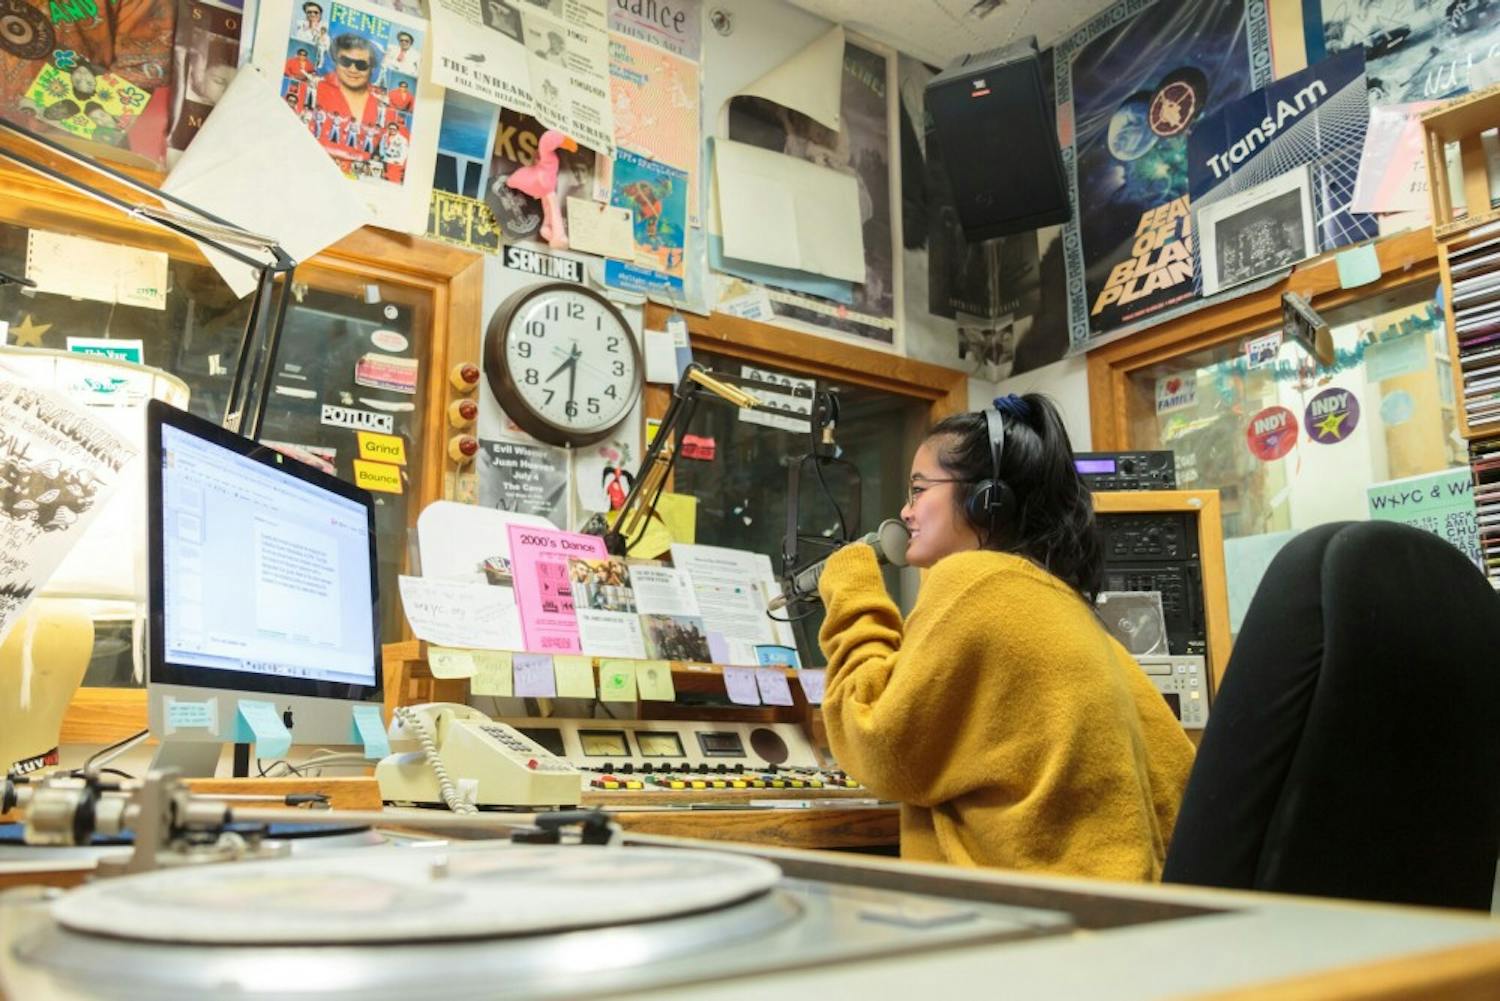 Sophomore psychology and statistics major Joanna Zhang works as a student DJ at UNC's WXYC.